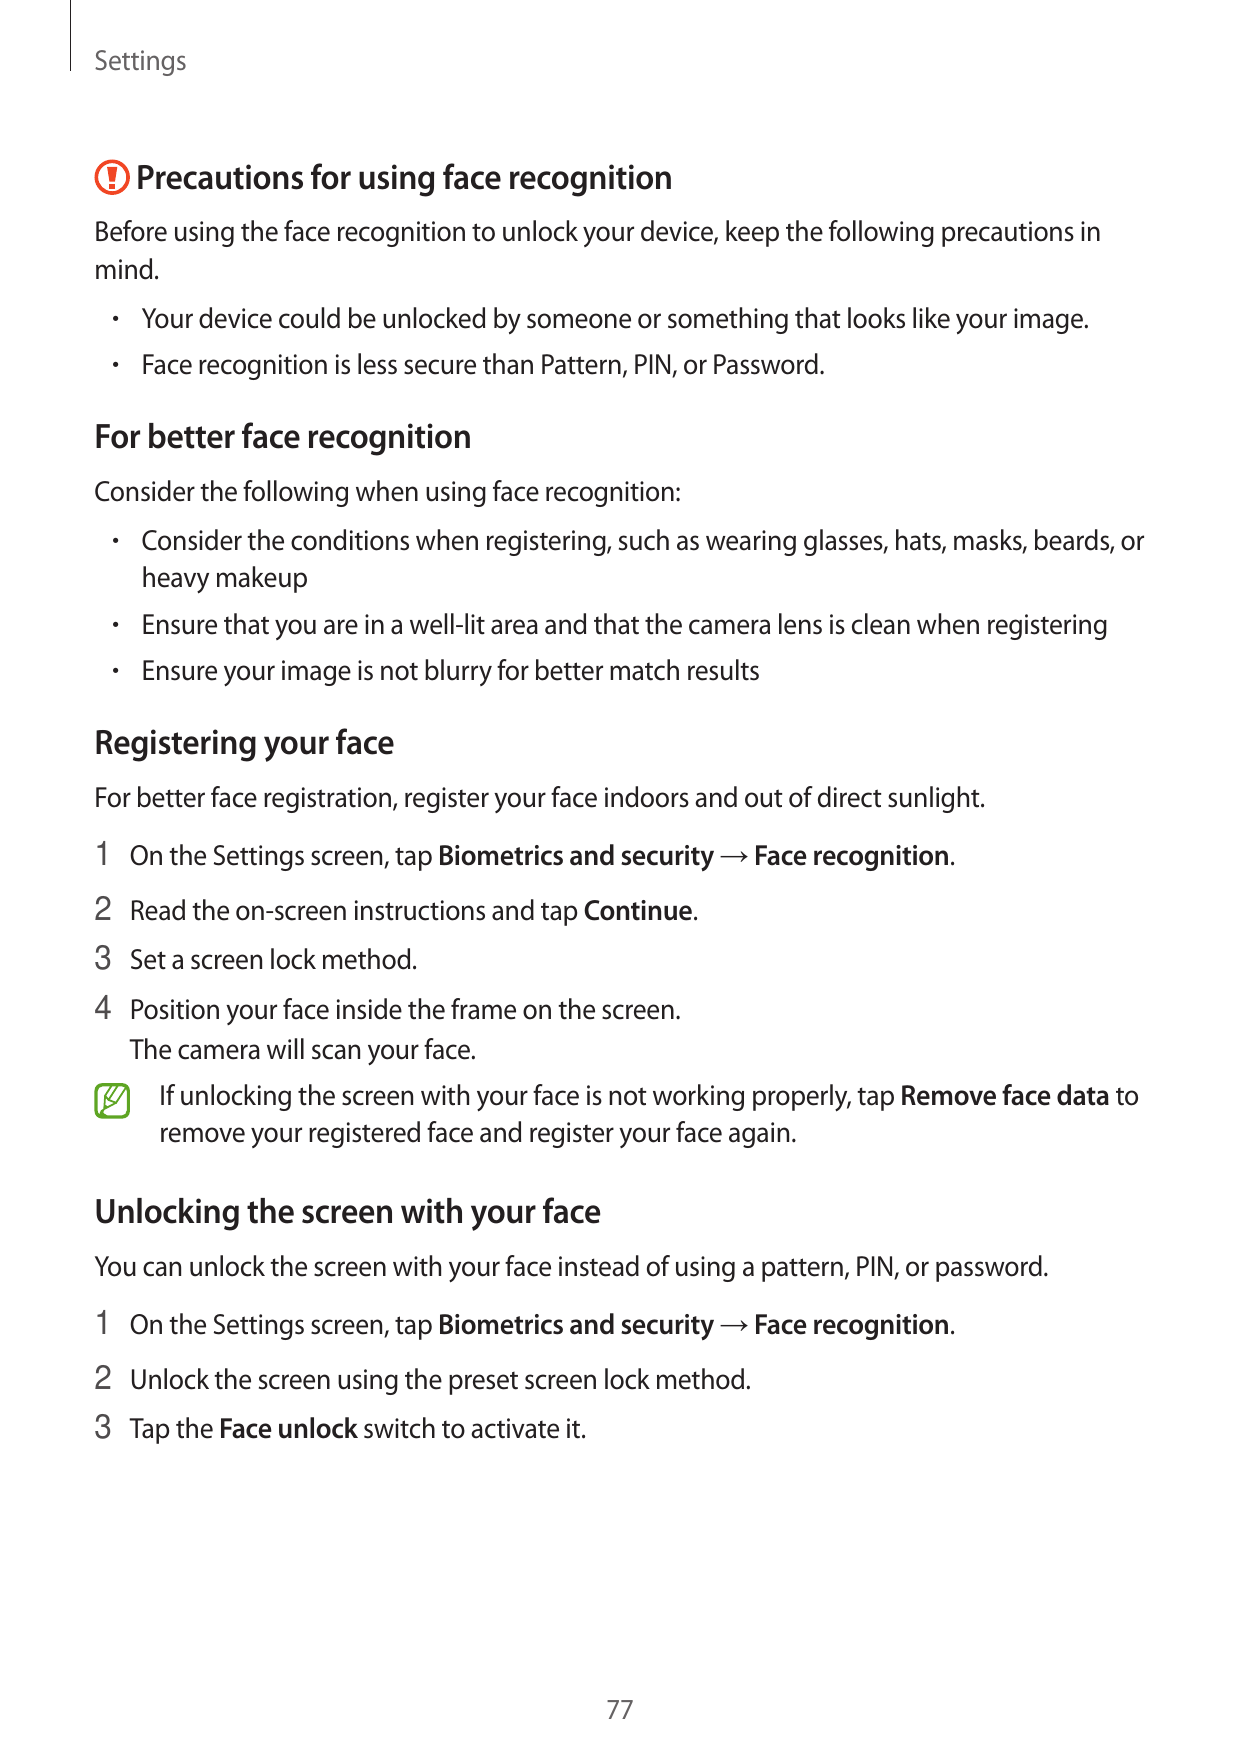 SettingsPrecautions for using face recognitionBefore using the face recognition to unlock your device, keep the following precau